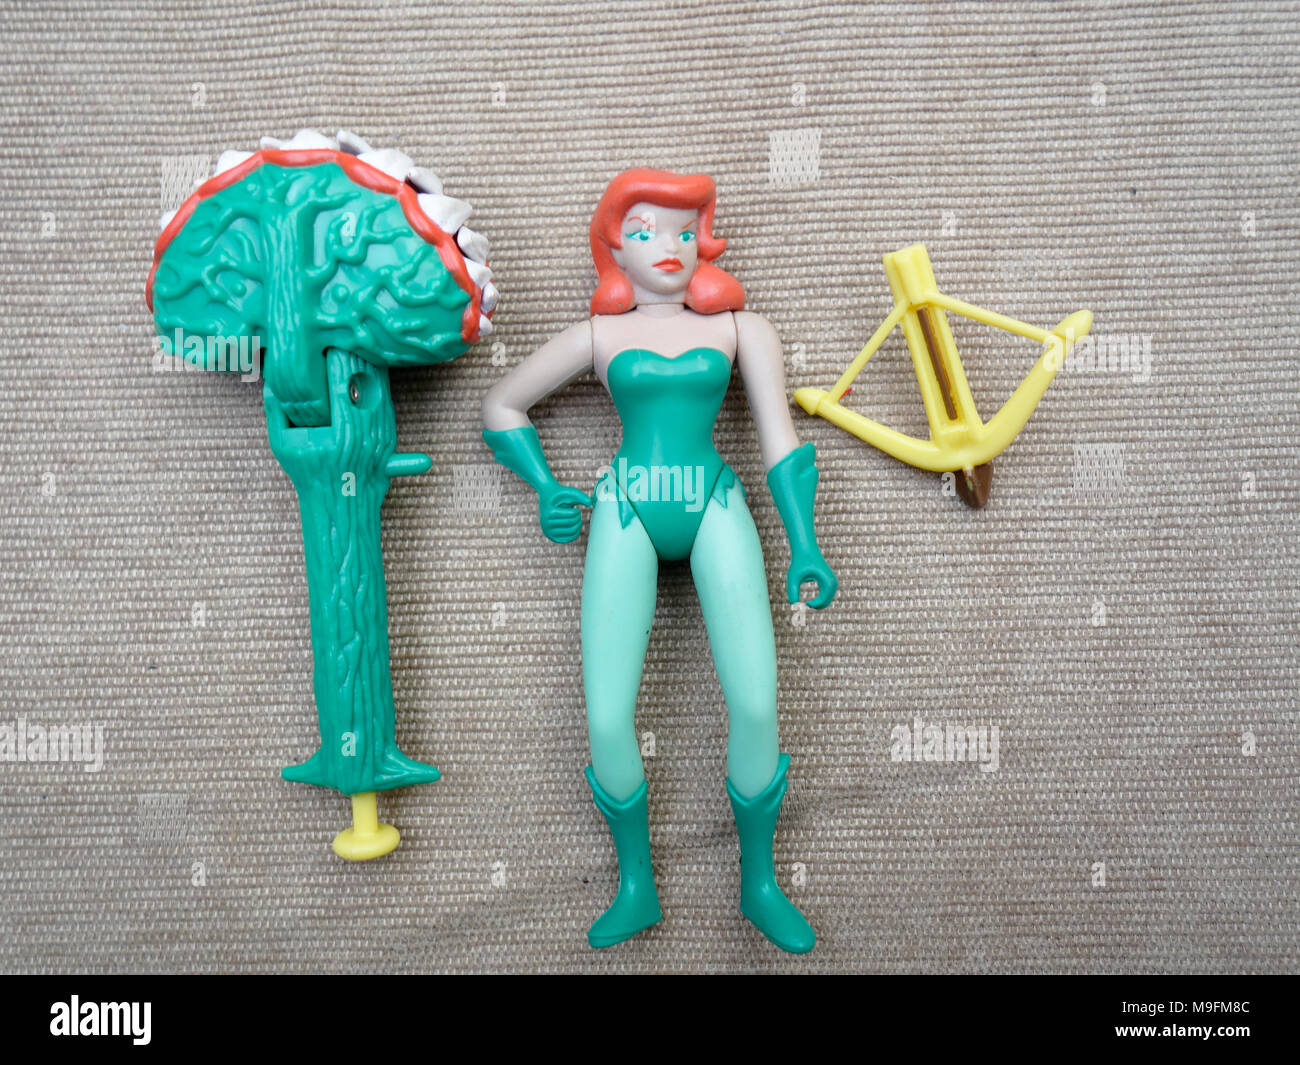 poison ivy kenner action figure Stock Photo